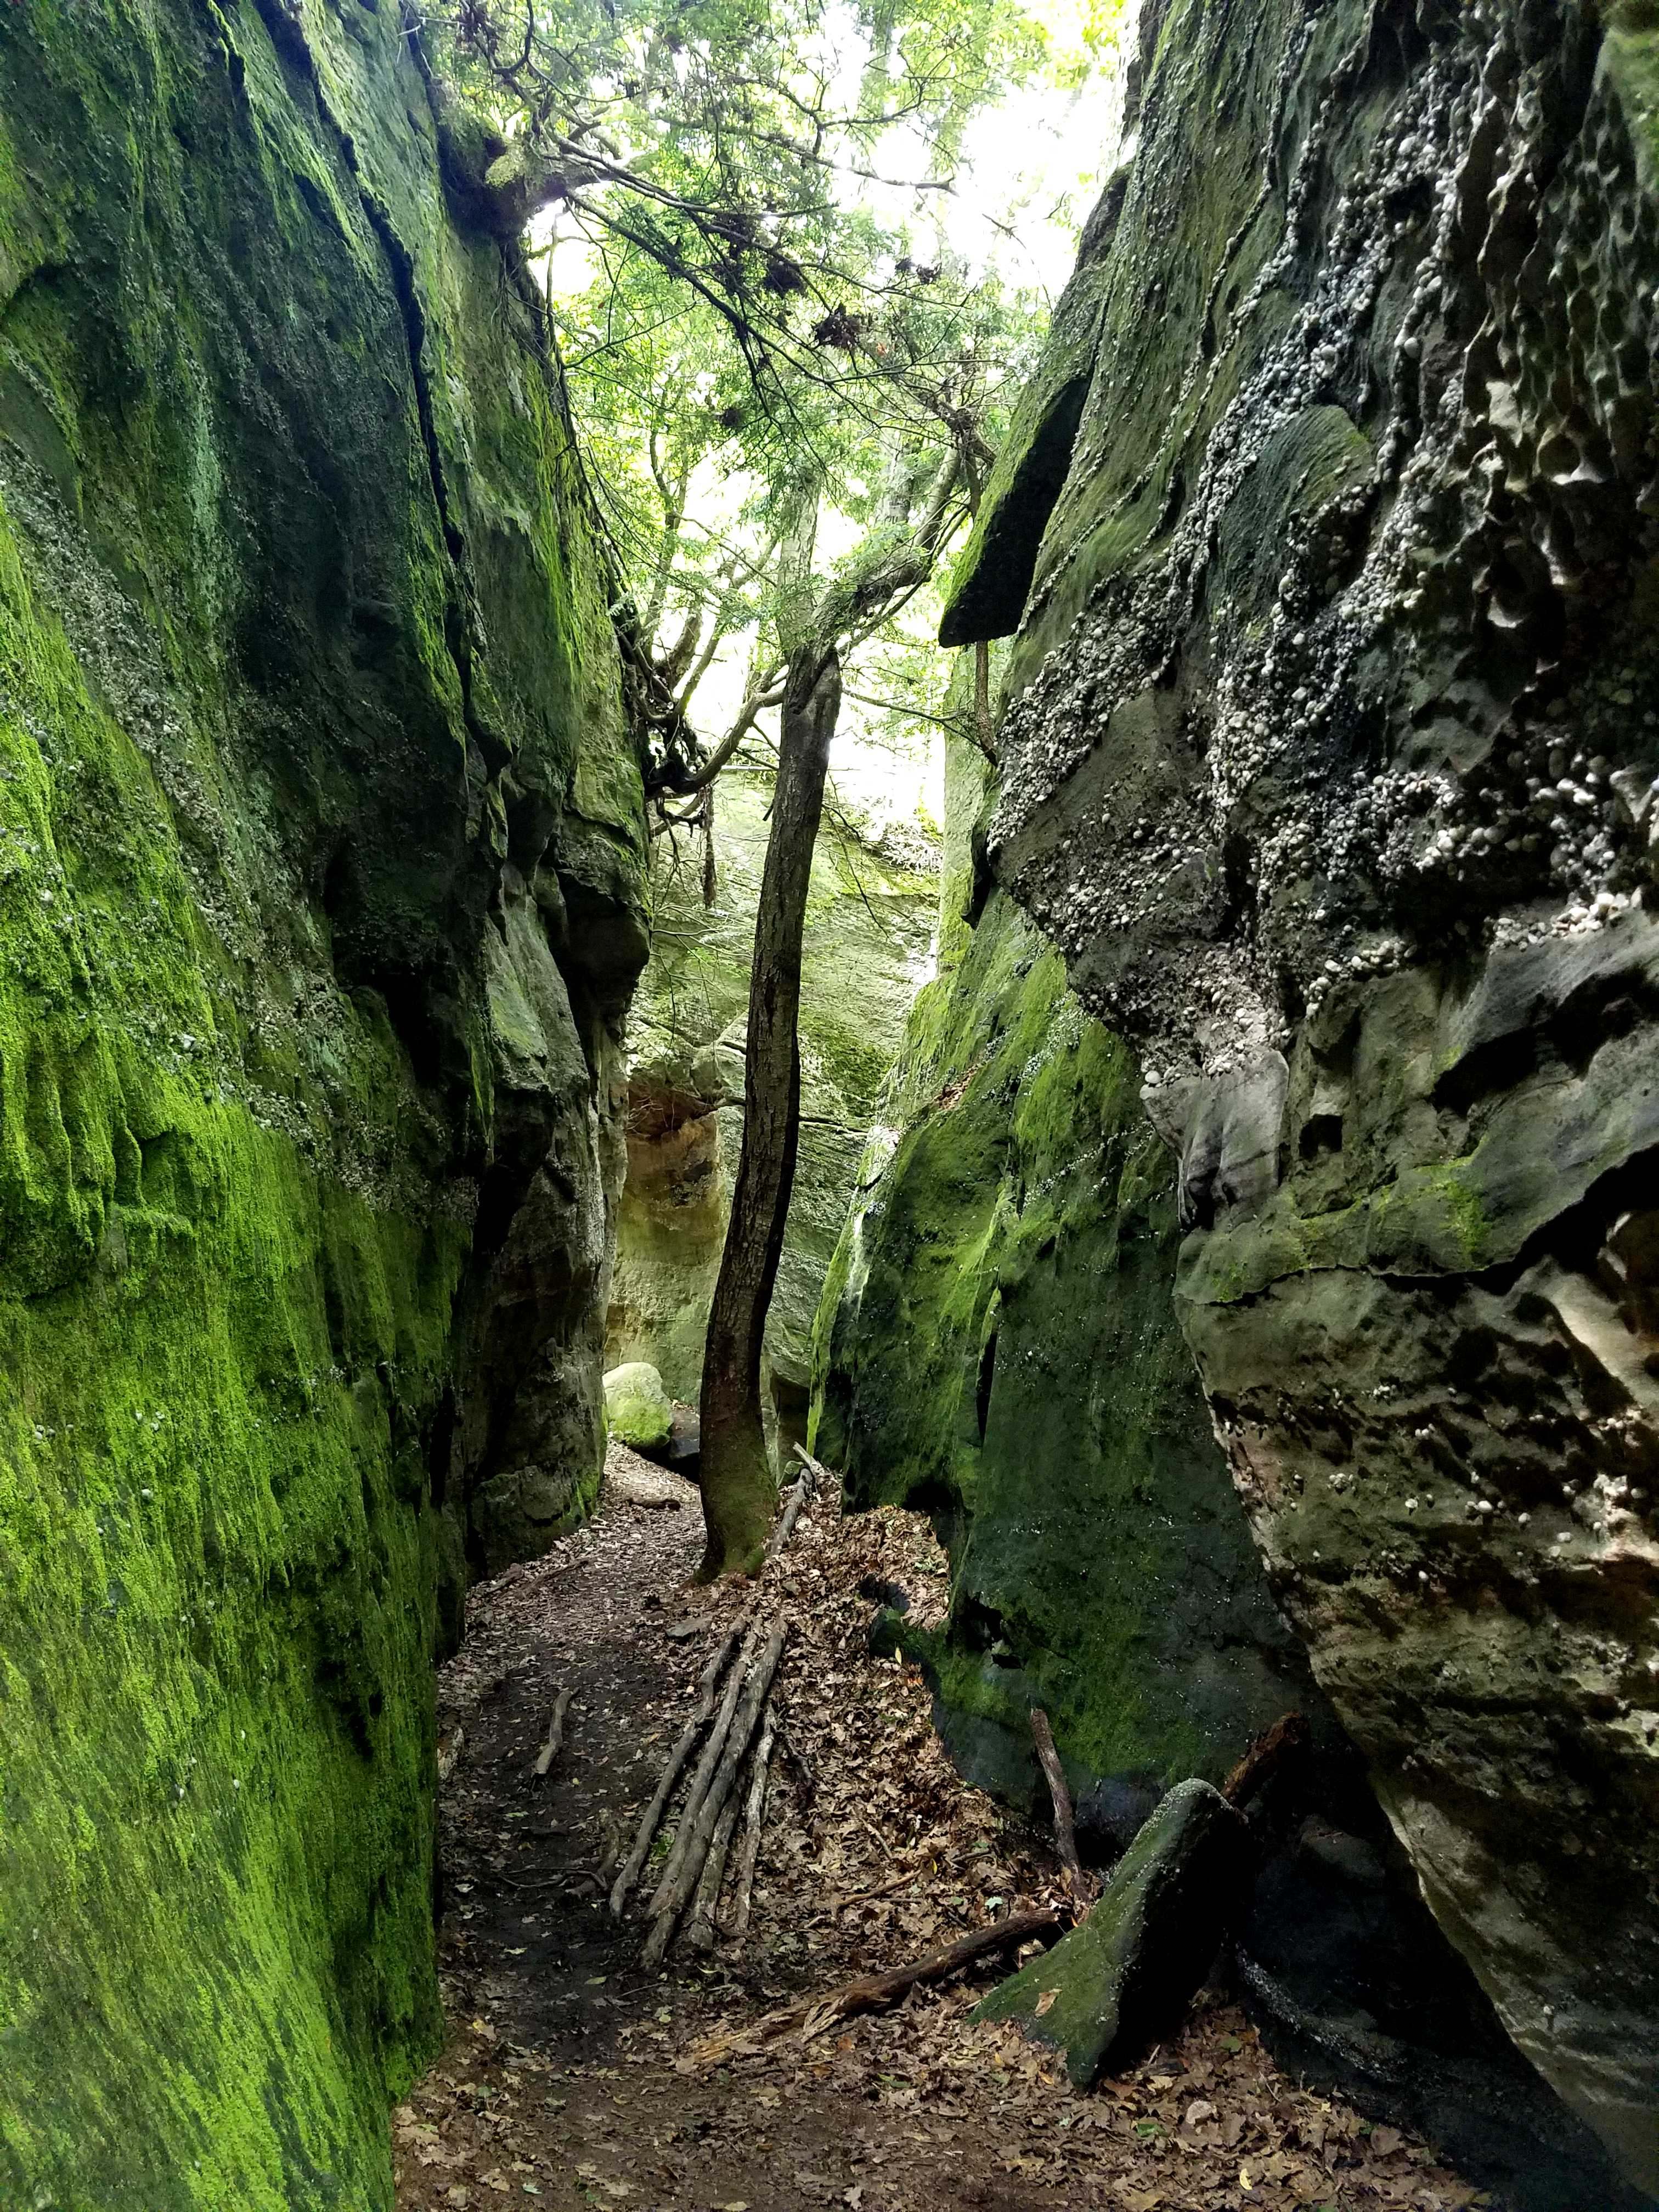 Tree growing in rock slot in the Alleghany National Forest